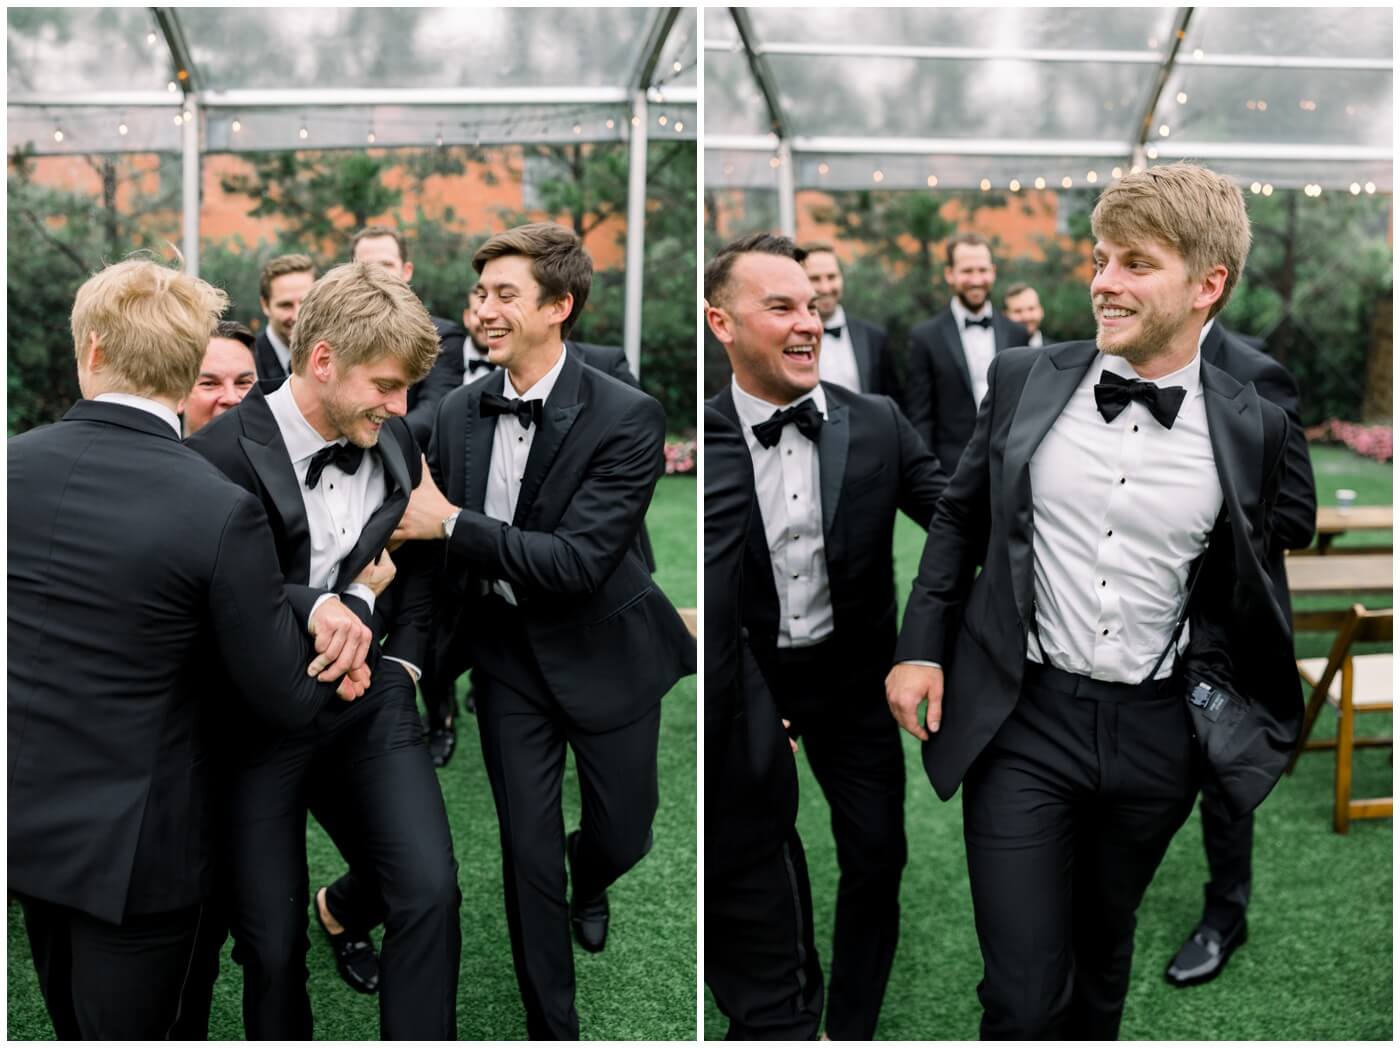 The Groom smiles with his groomsmen on his wedding day